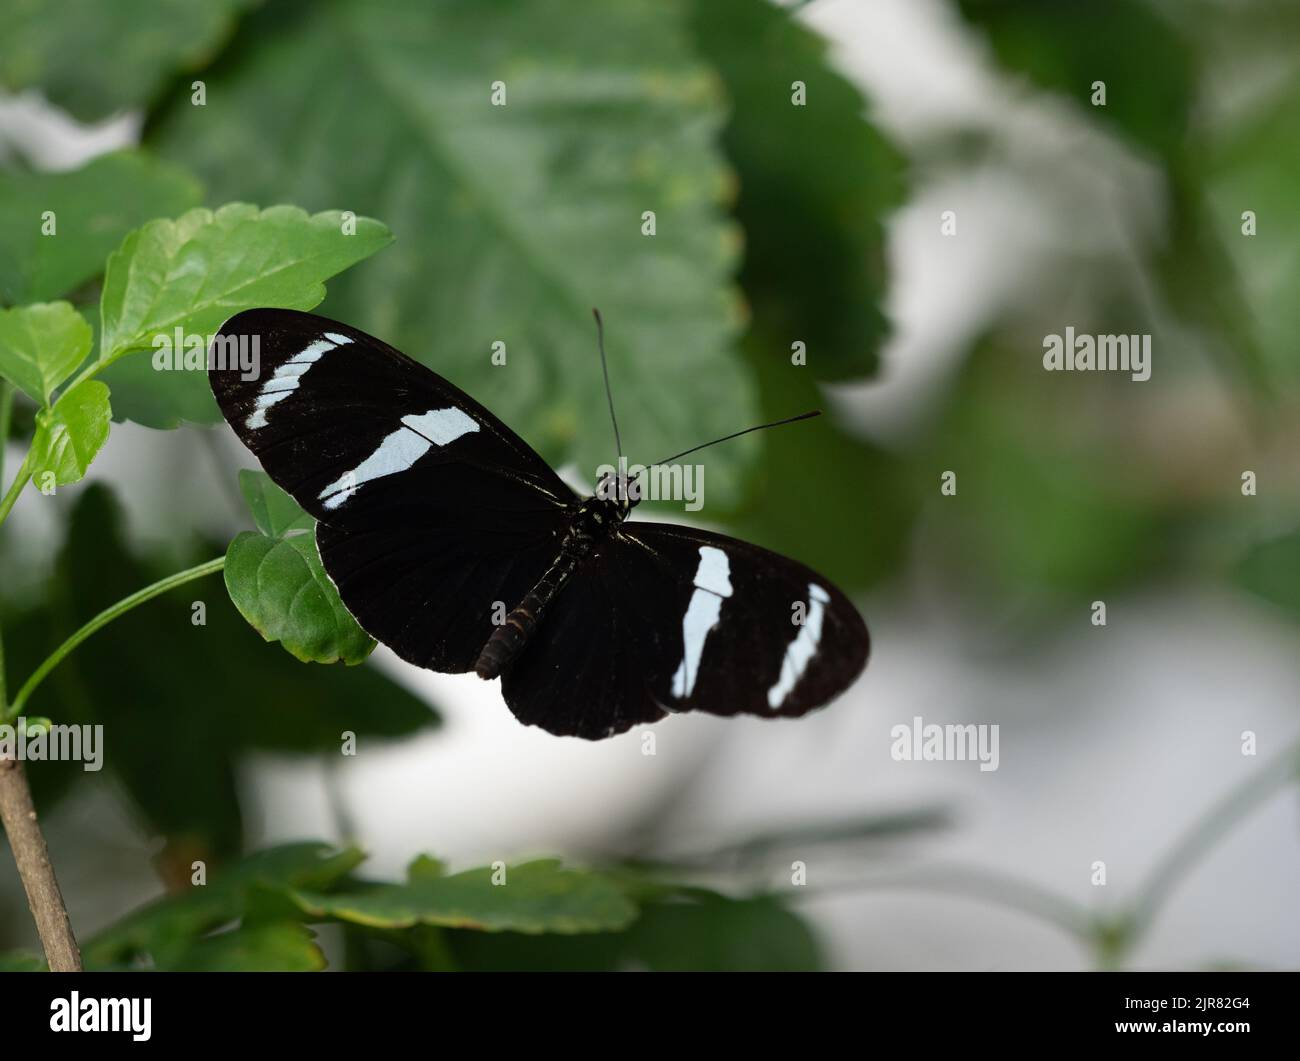 Black and white Antiochus Longwing or Helioconius antiochus butterfly perched on a green leaf with open wings. Photographed with a shallow depth of fi Stock Photo